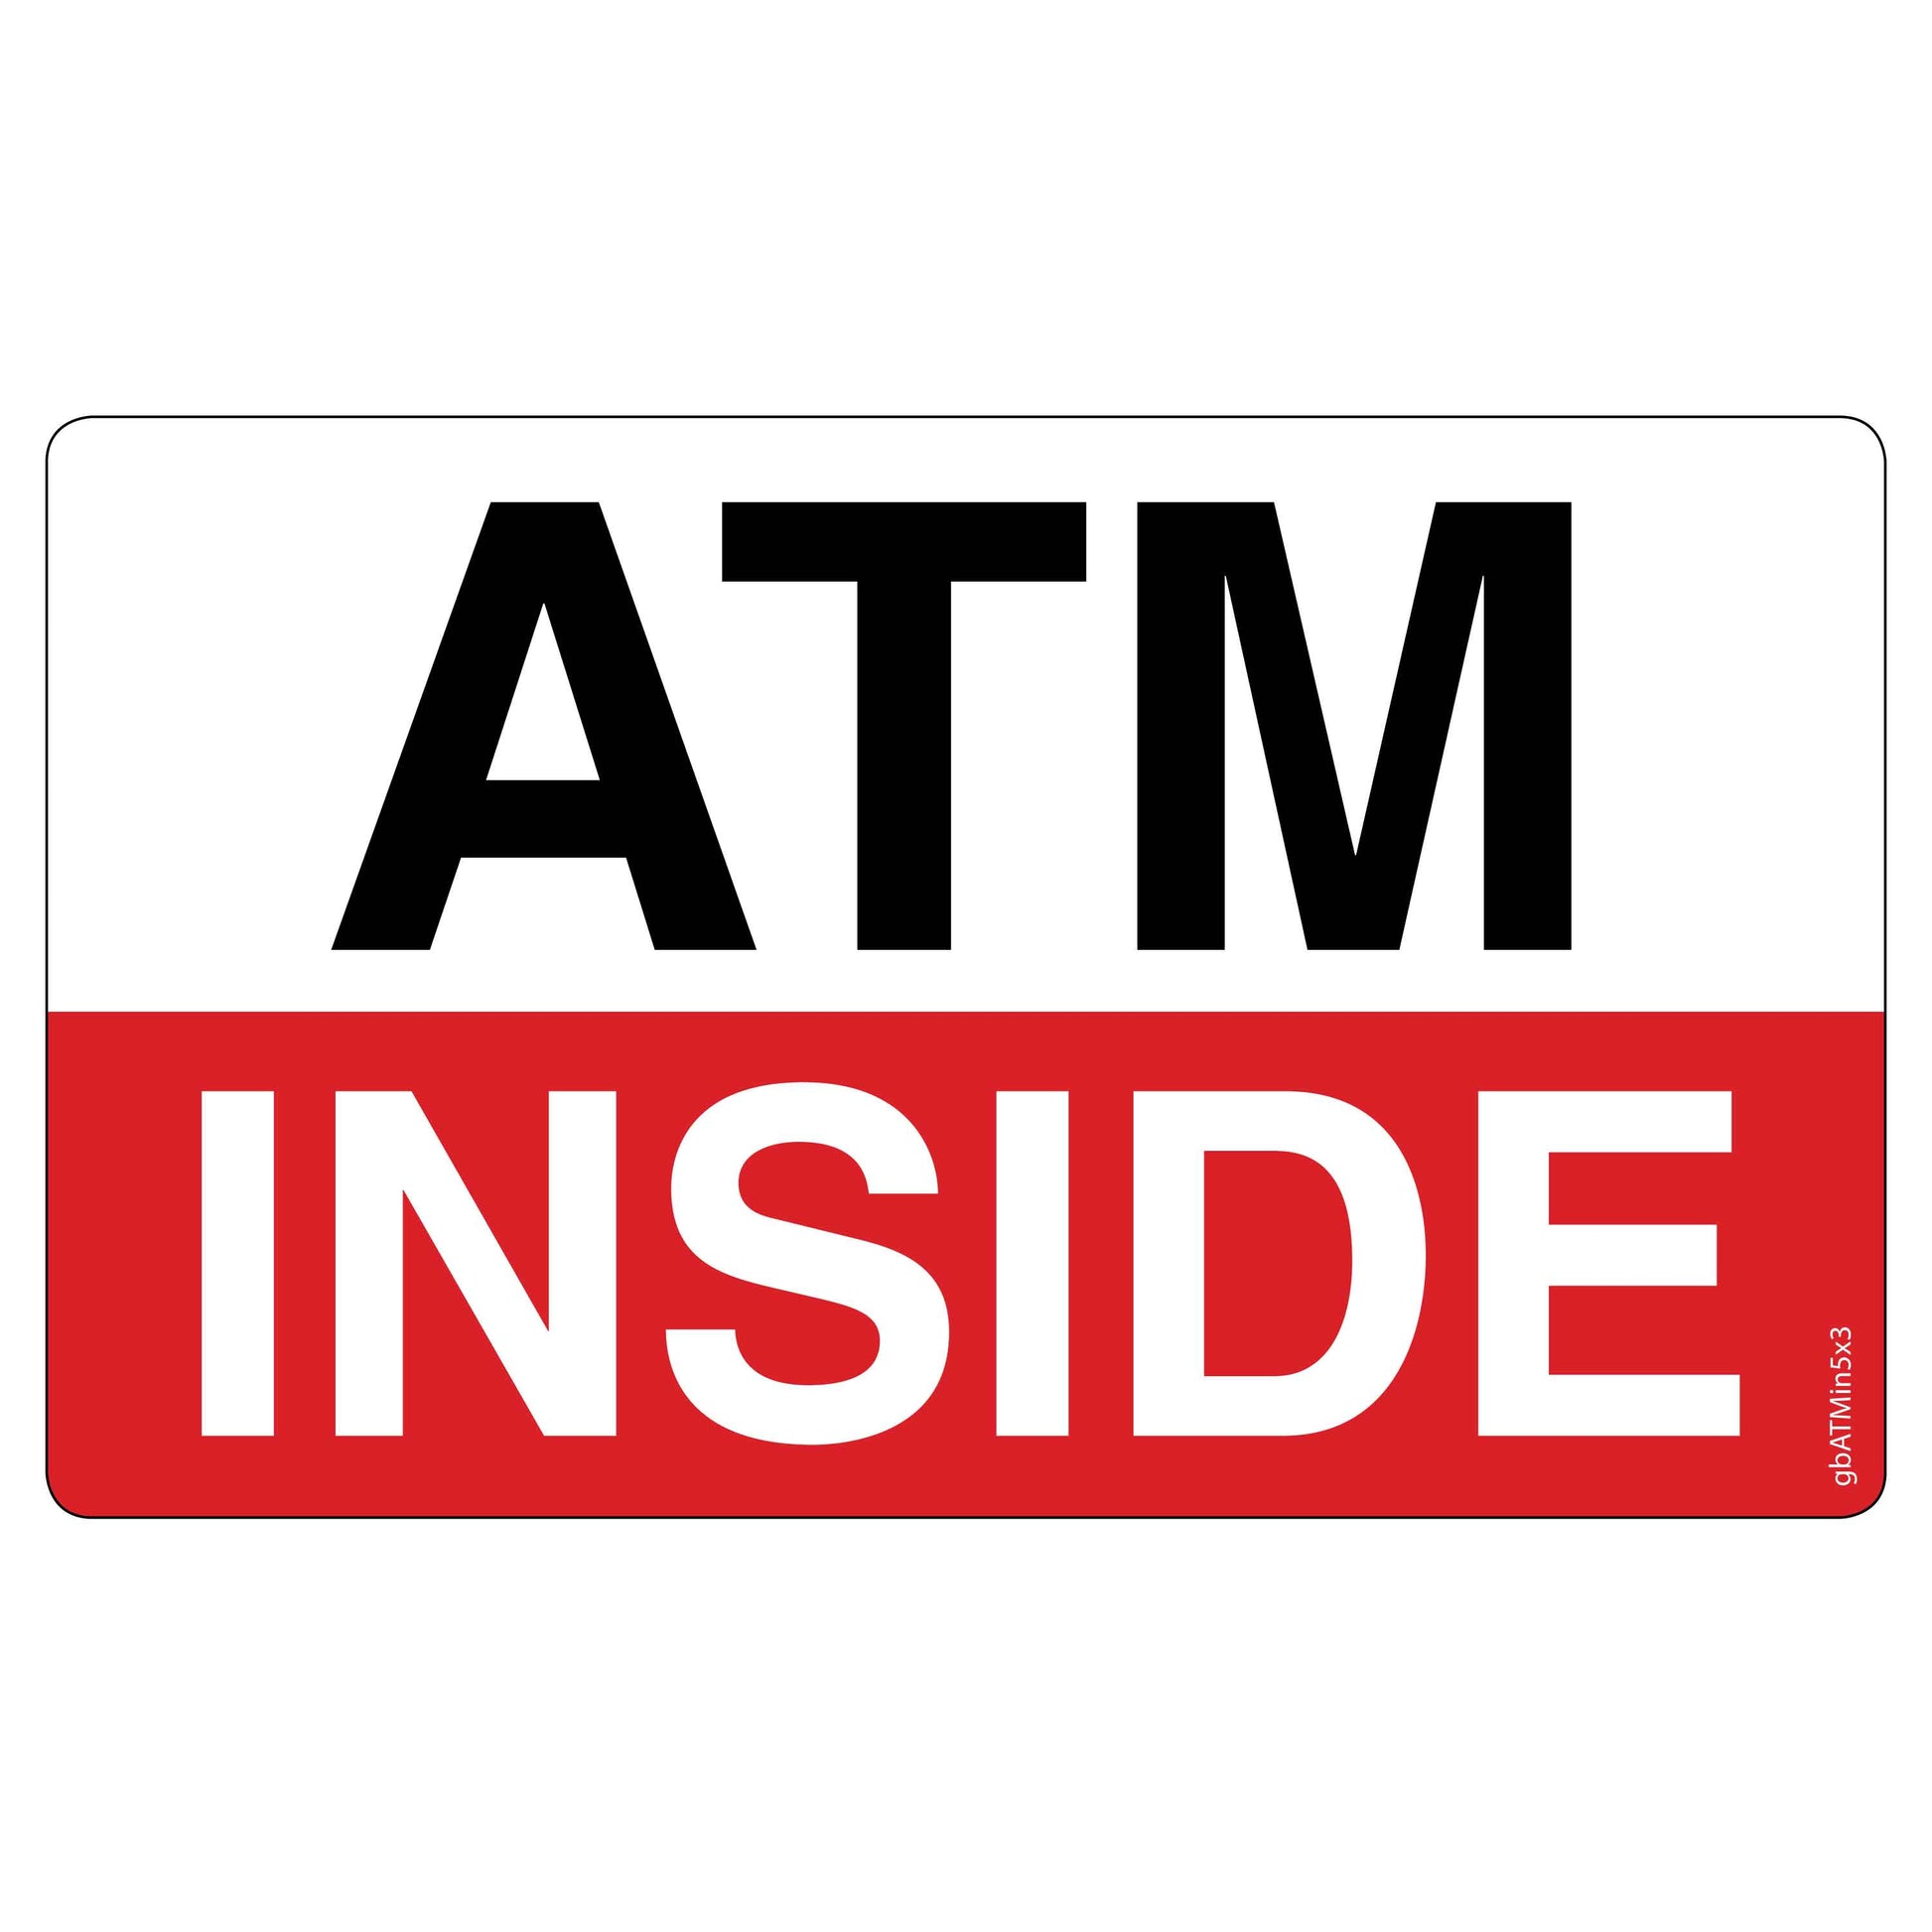 ATM Inside Decal. 5 inches by 3 inches in size. 